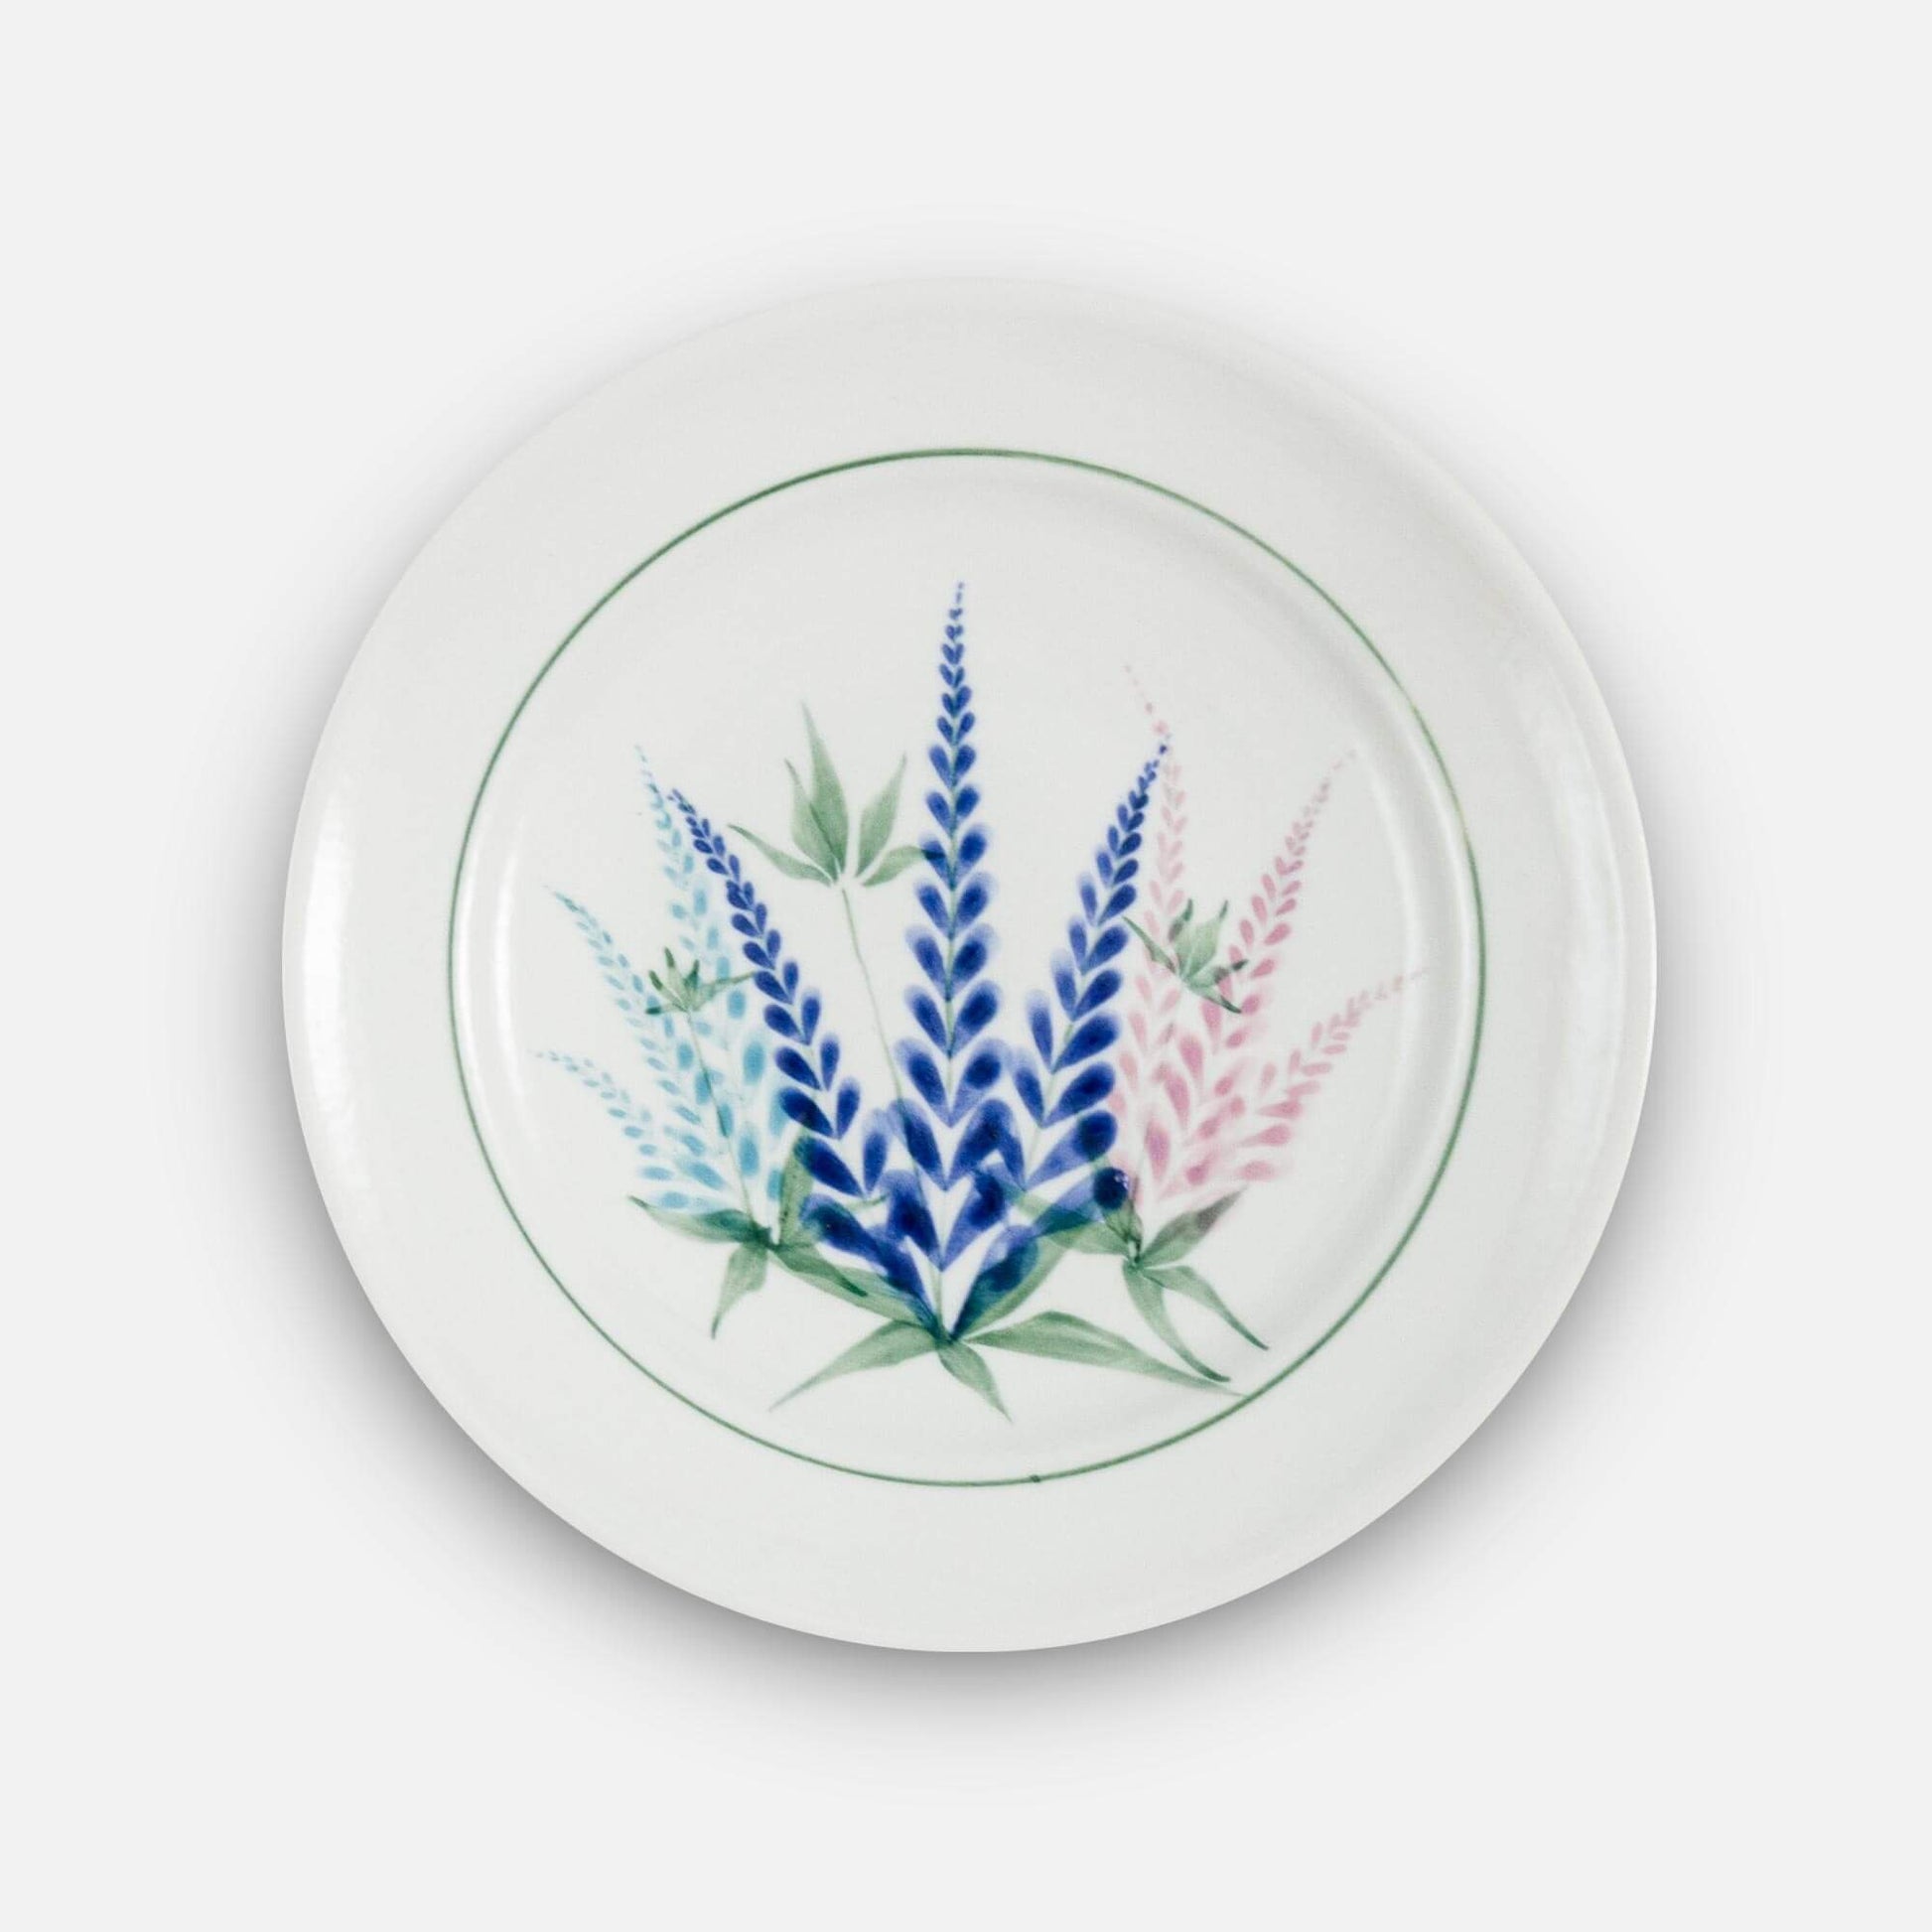 Handmade Pottery Footed Dinner Plate in Lupine pattern made by Georgetown Pottery in Maine